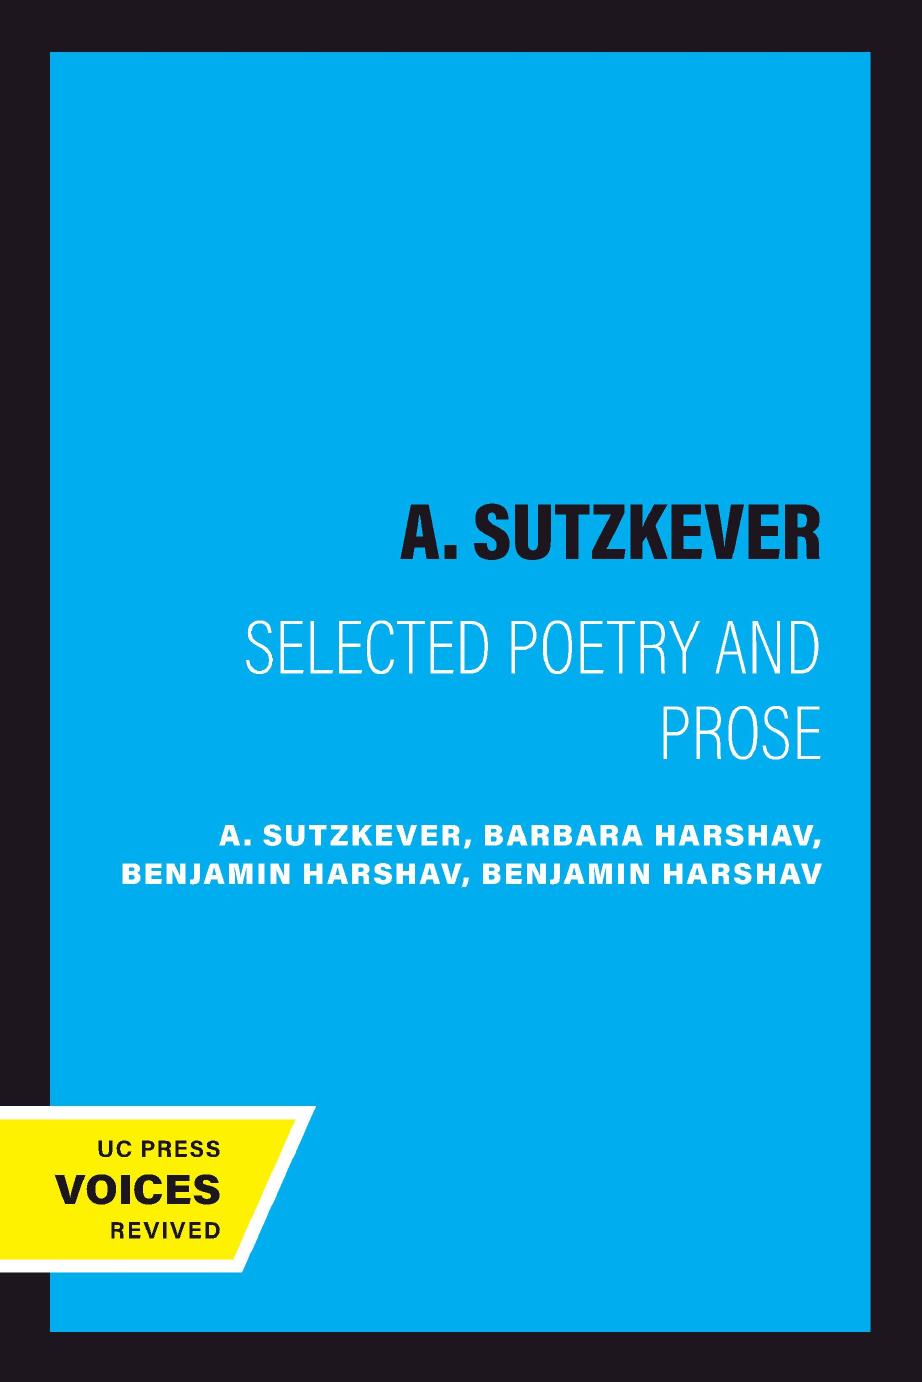 A. Sutzkever: Selected Poetry and Prose by A. Sutzkever (editor); Barbara Harshav (editor); Benjamin Harshav (editor)